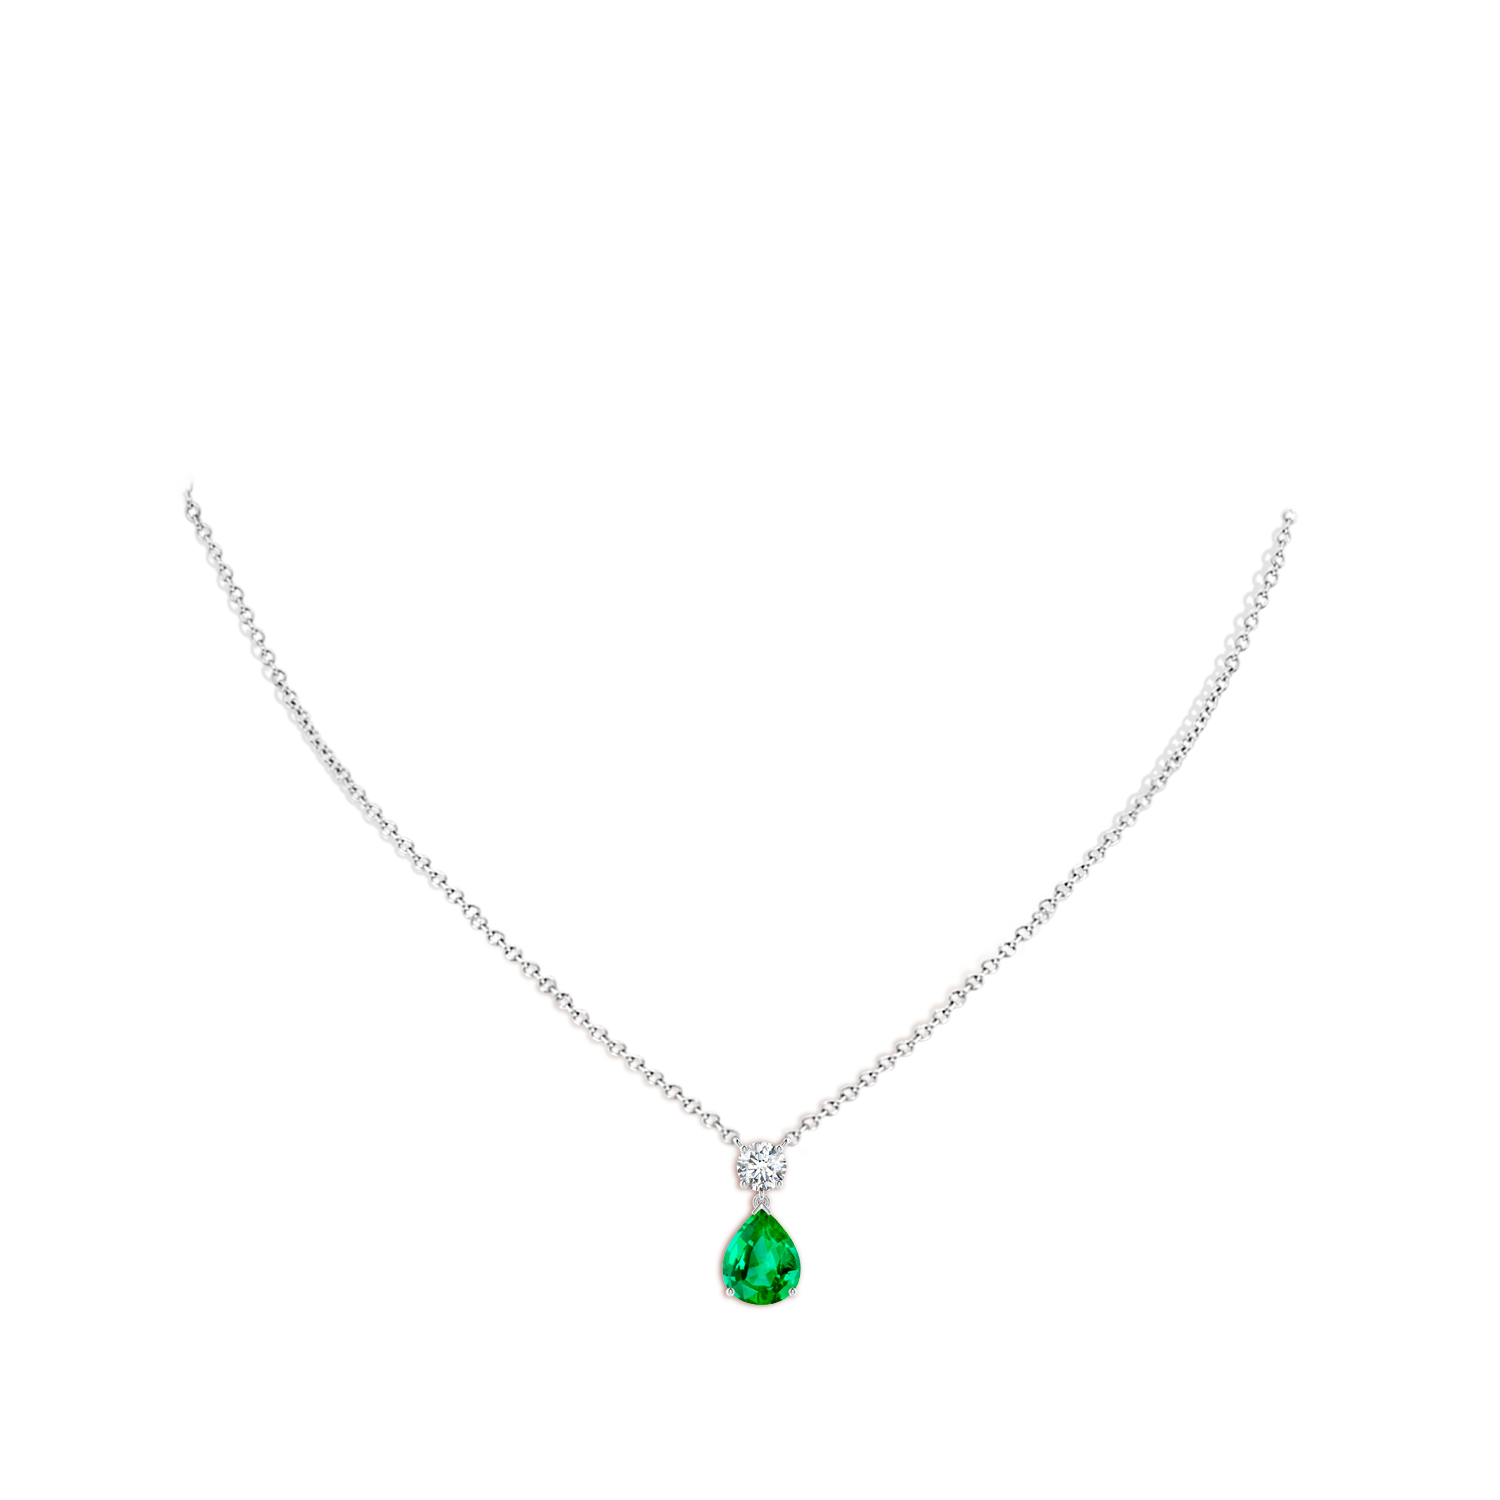 AAA - Emerald / 3 CT / 18 KT White Gold